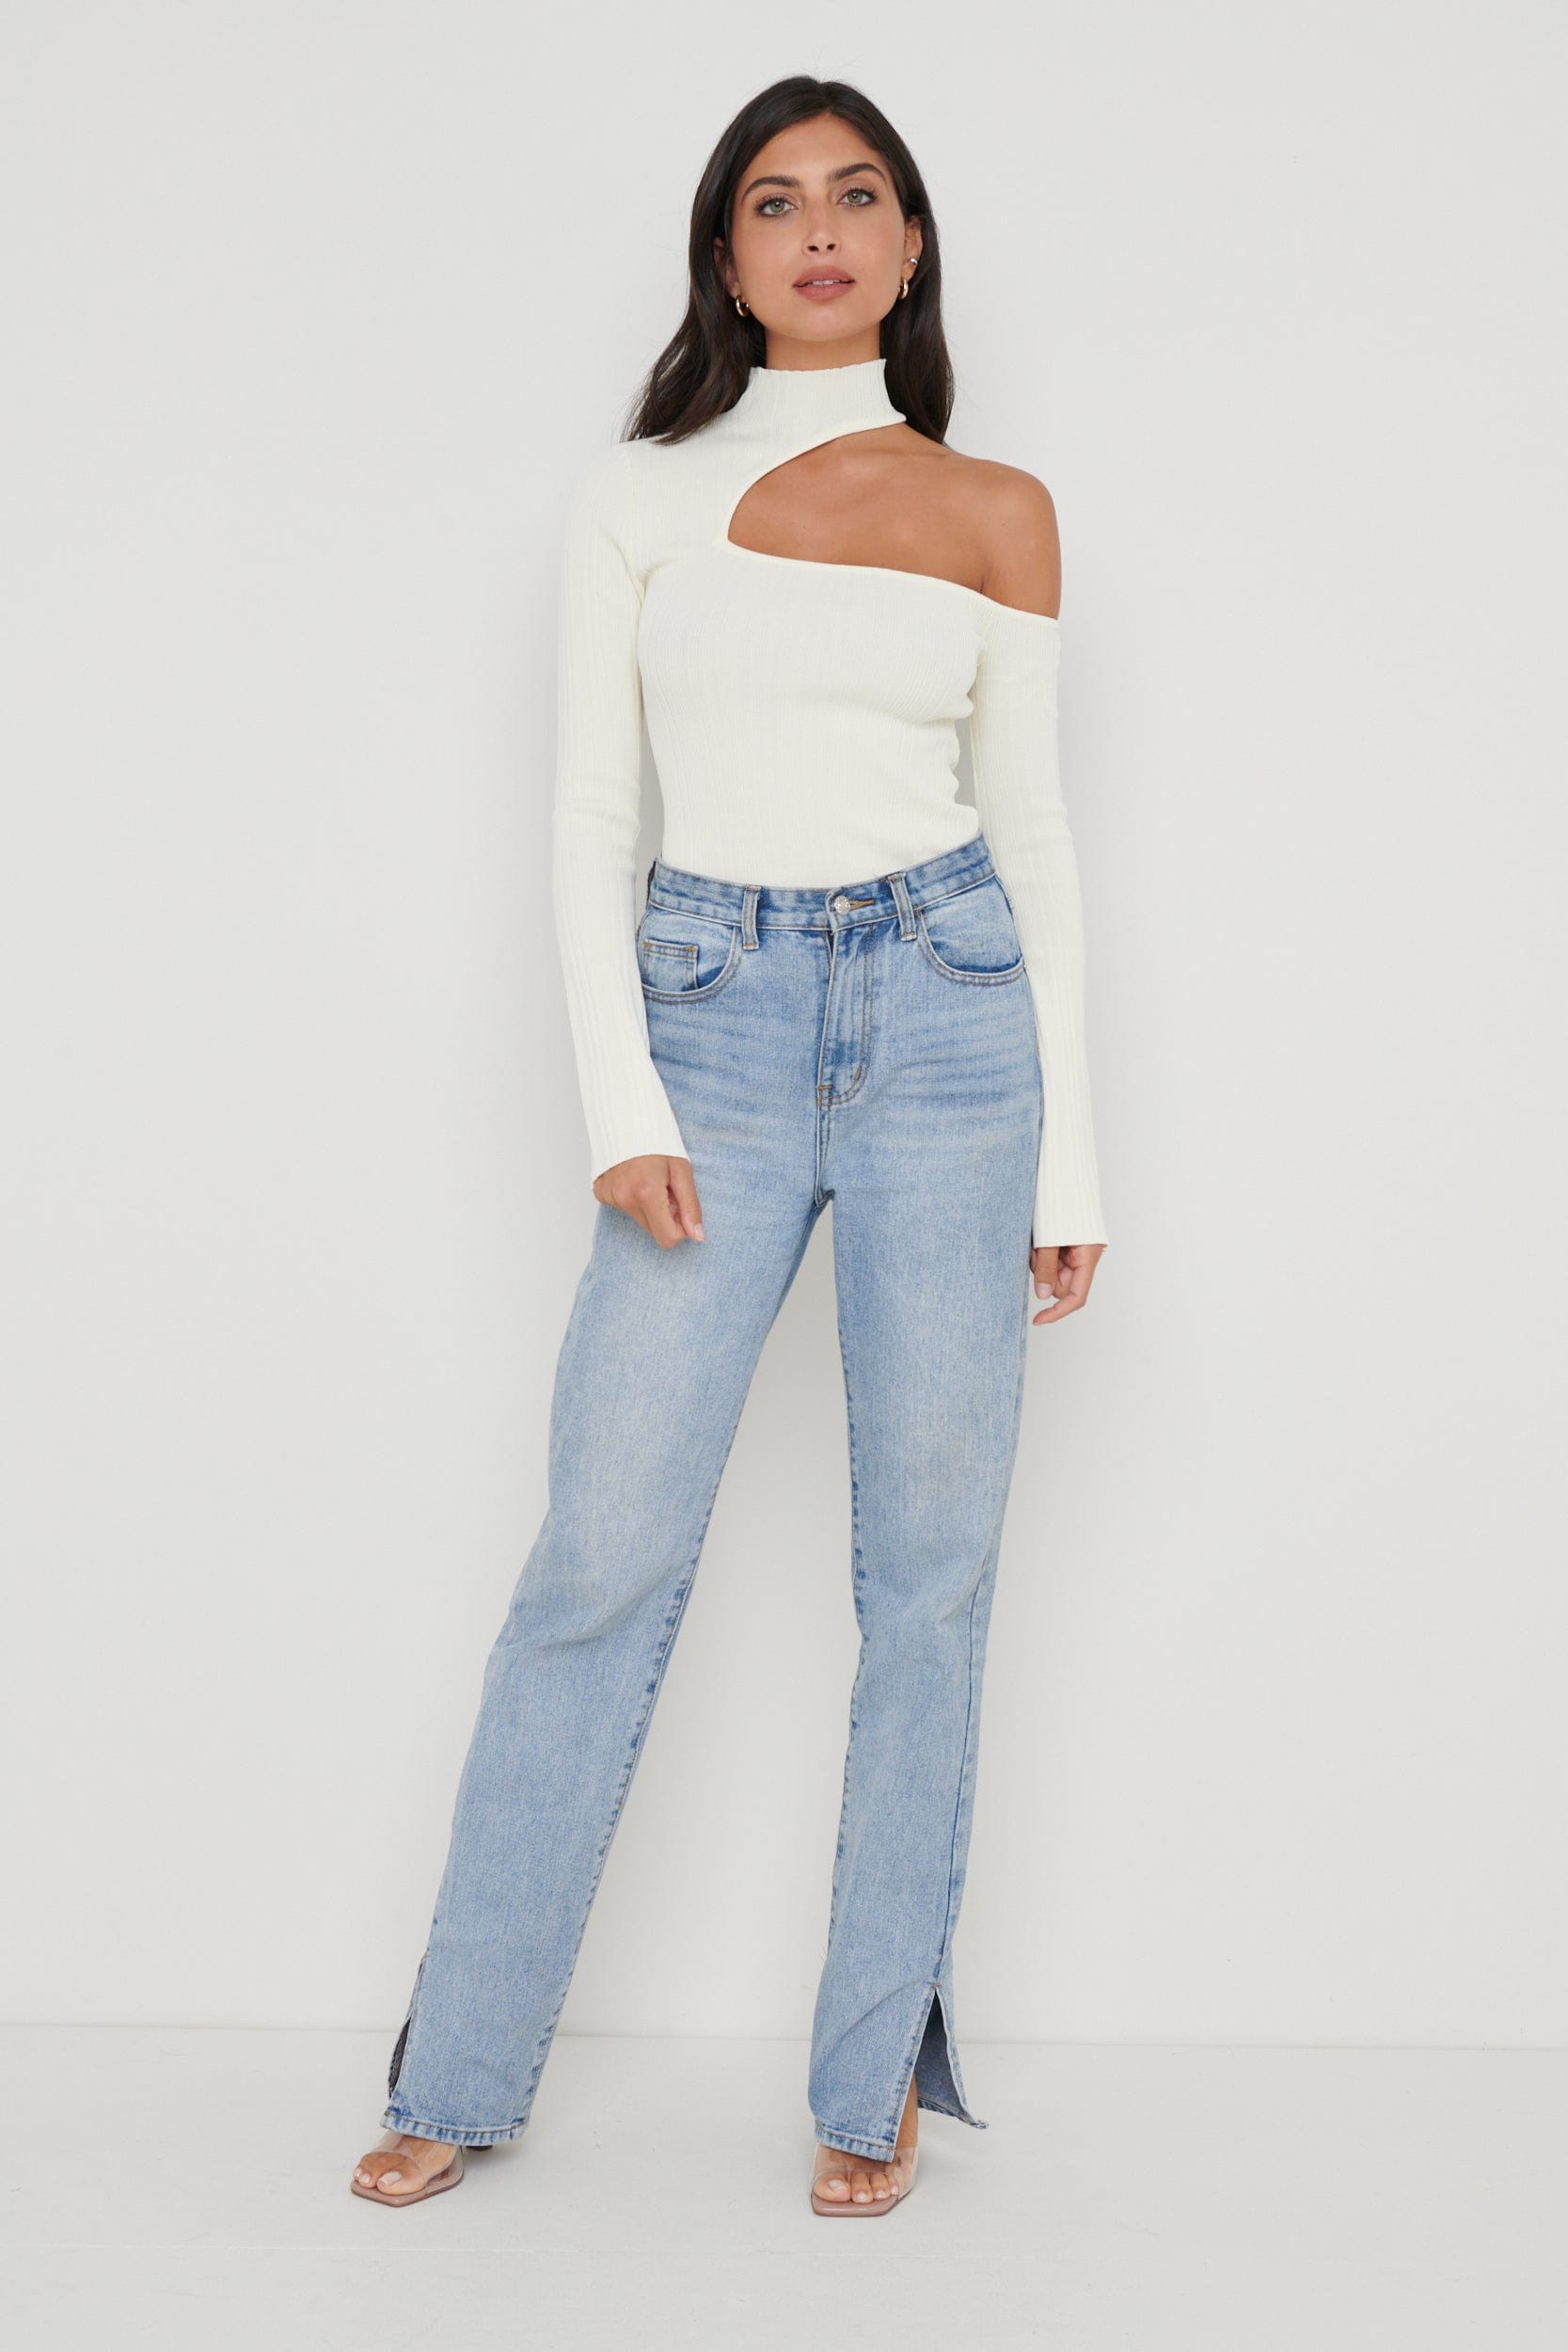 Presley High Neck Cut Out Knit Top - Cream